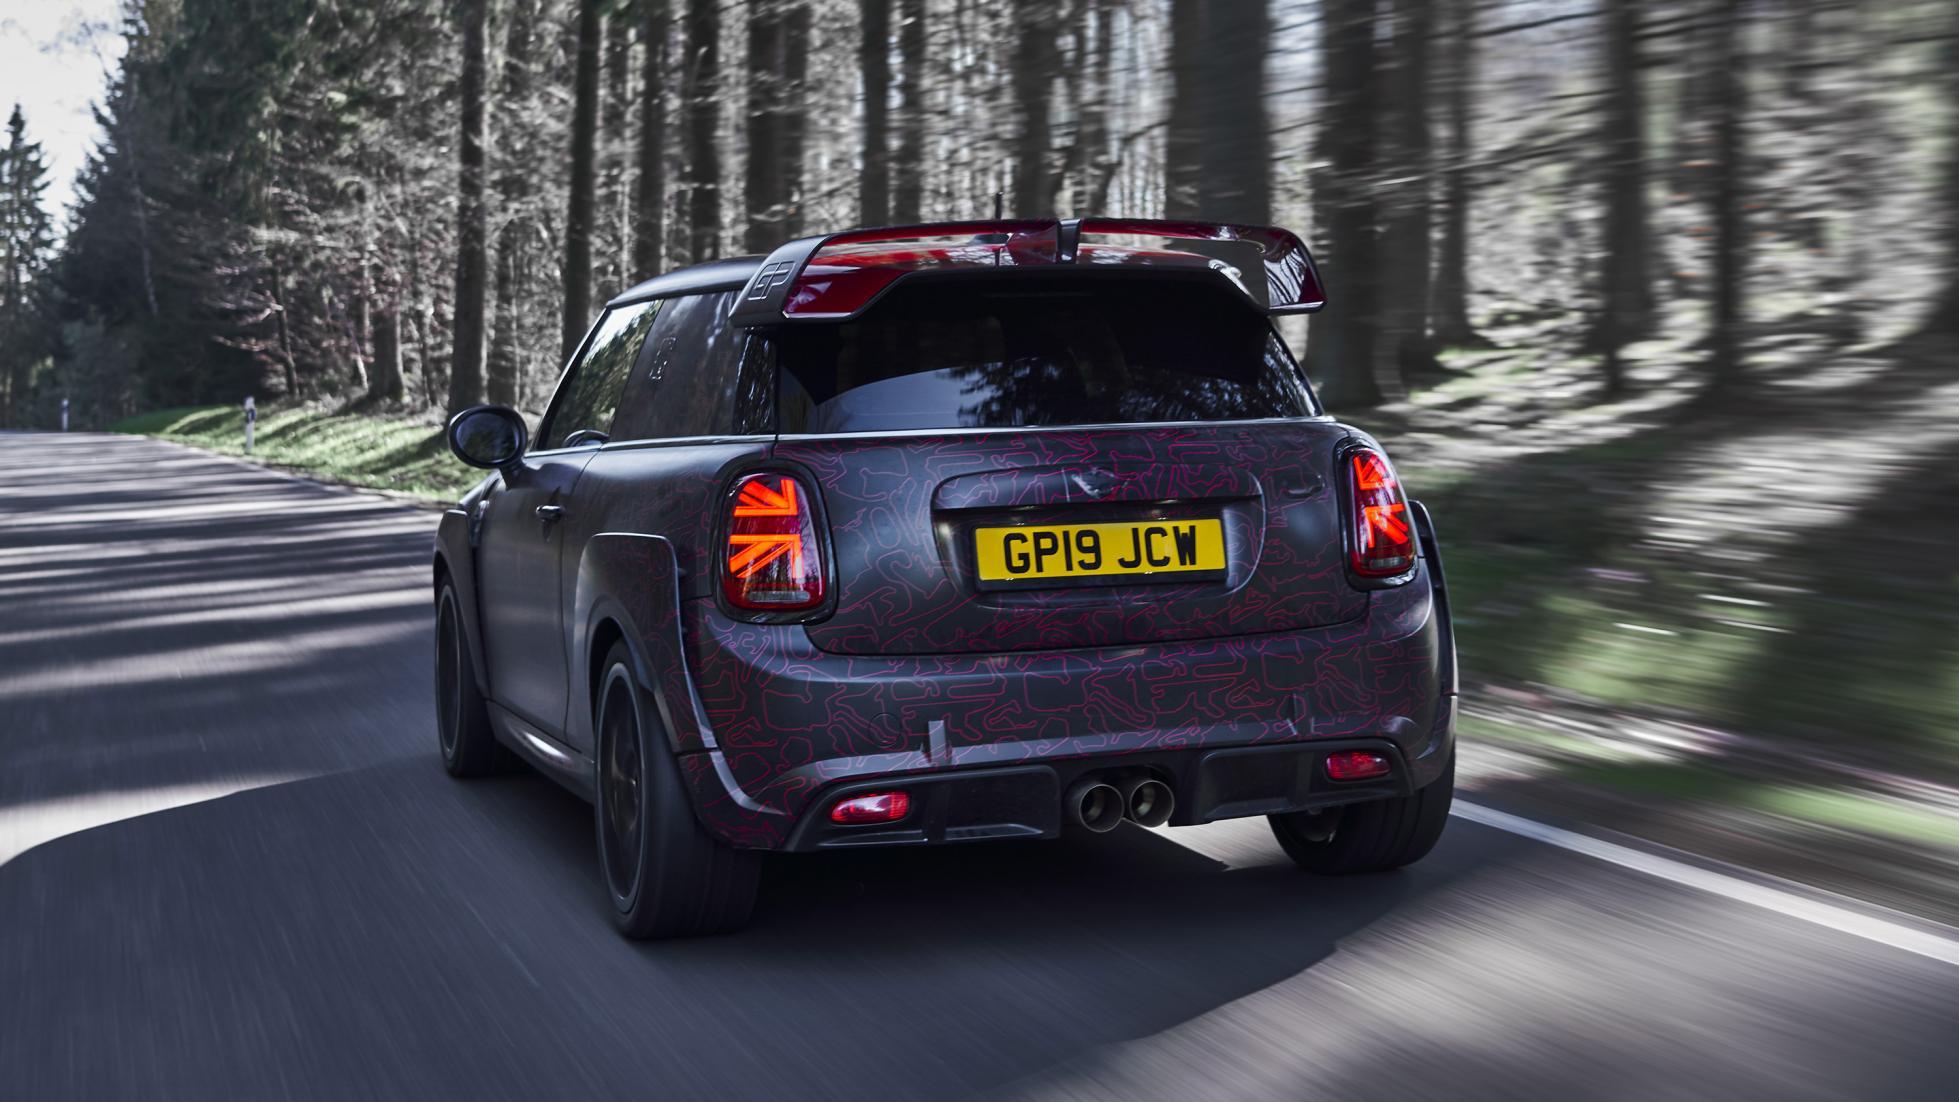 The new Mini GP will cost more than a Civic Type R